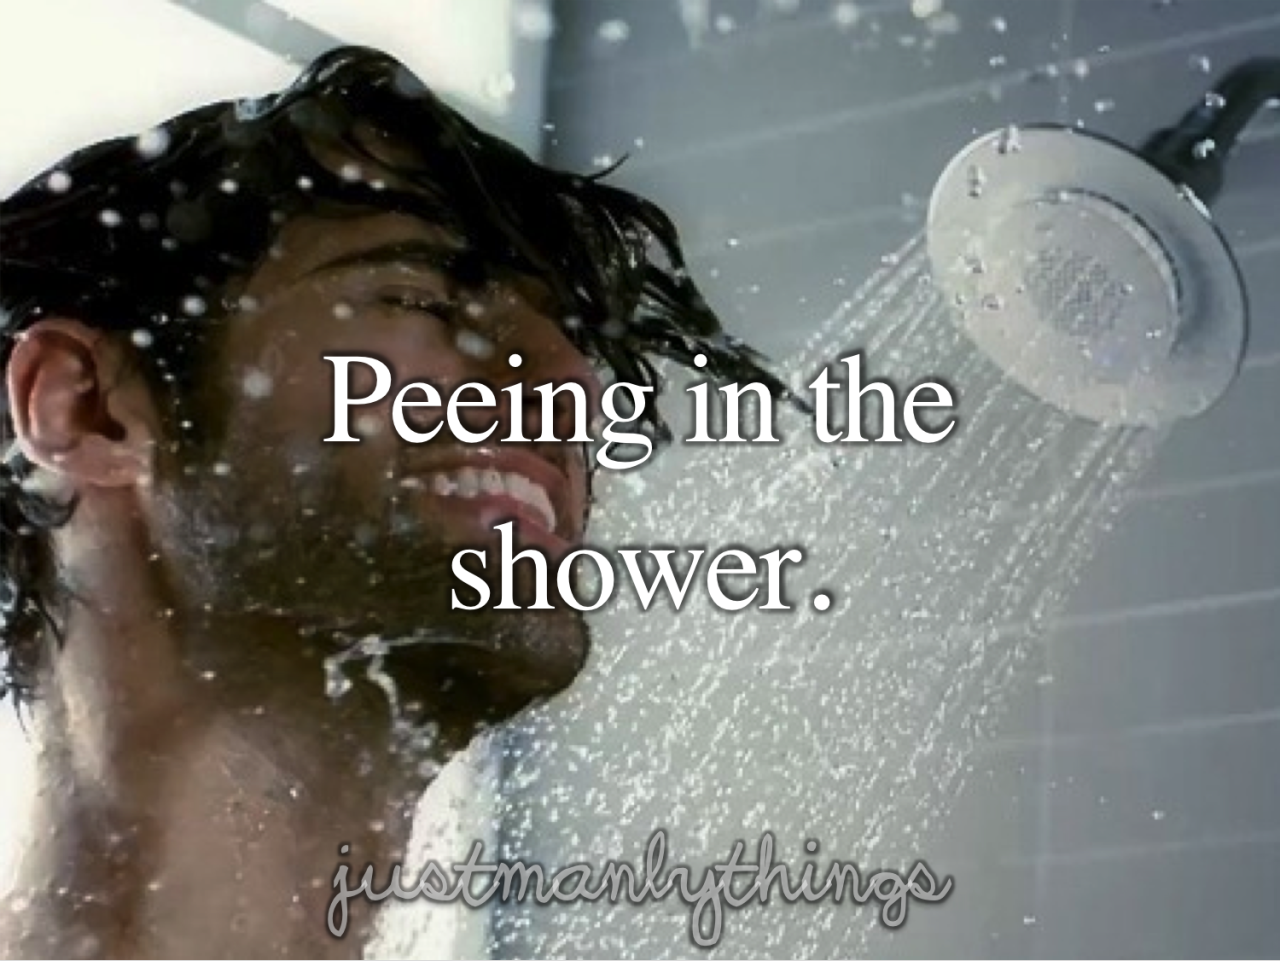 just manly things parody - Peeing in the shower. justinaneweringe.